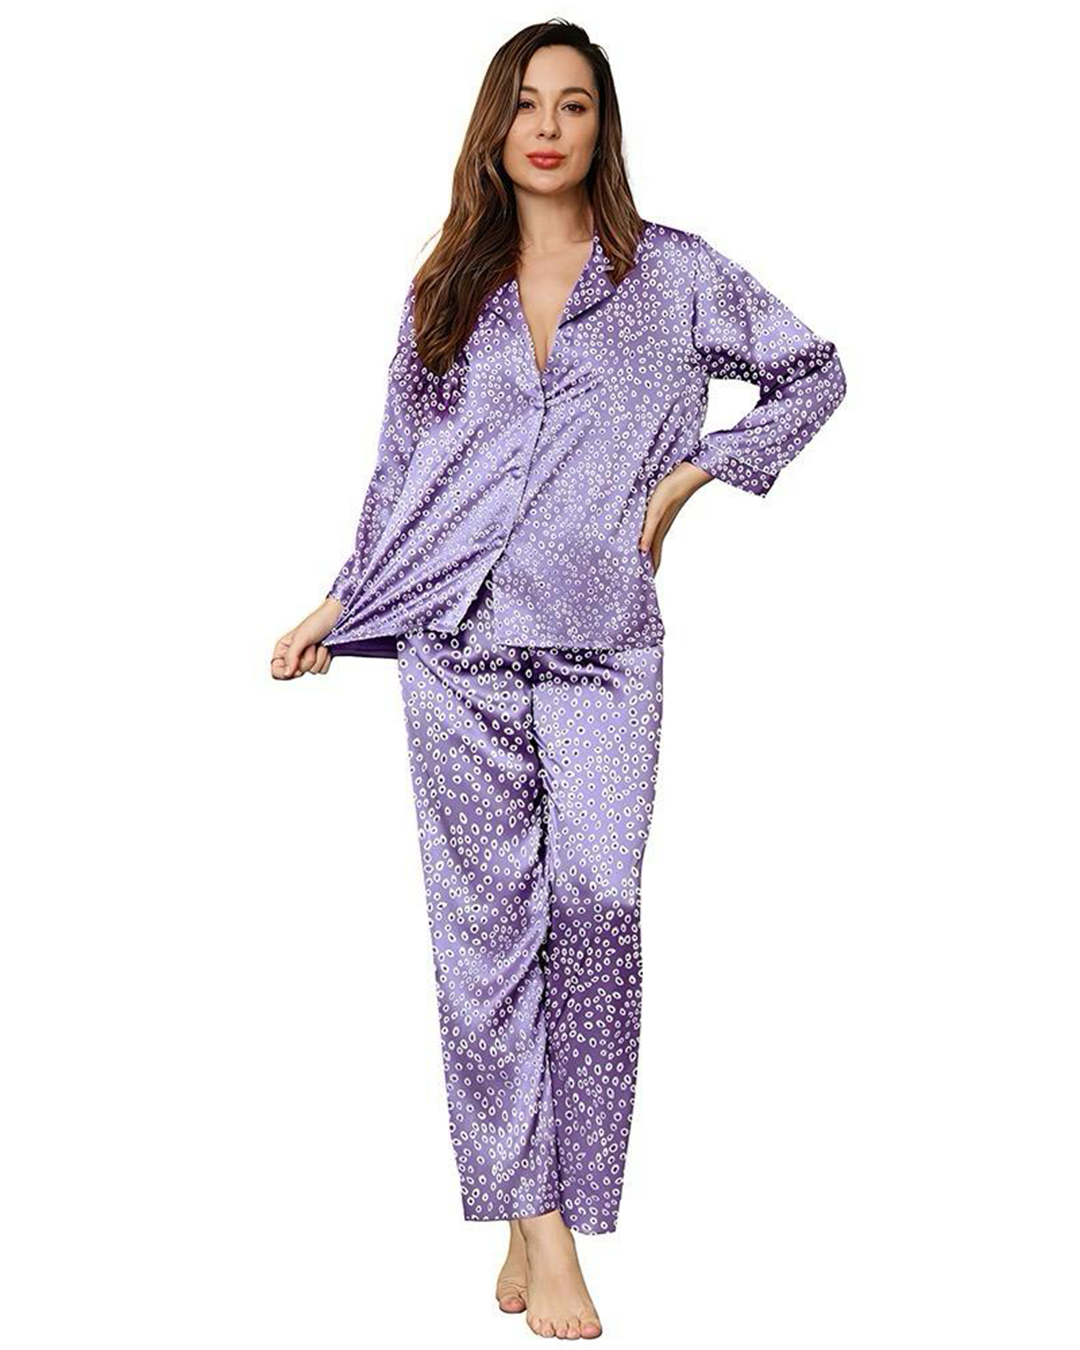 Women's pajamas with dotted satin buttons